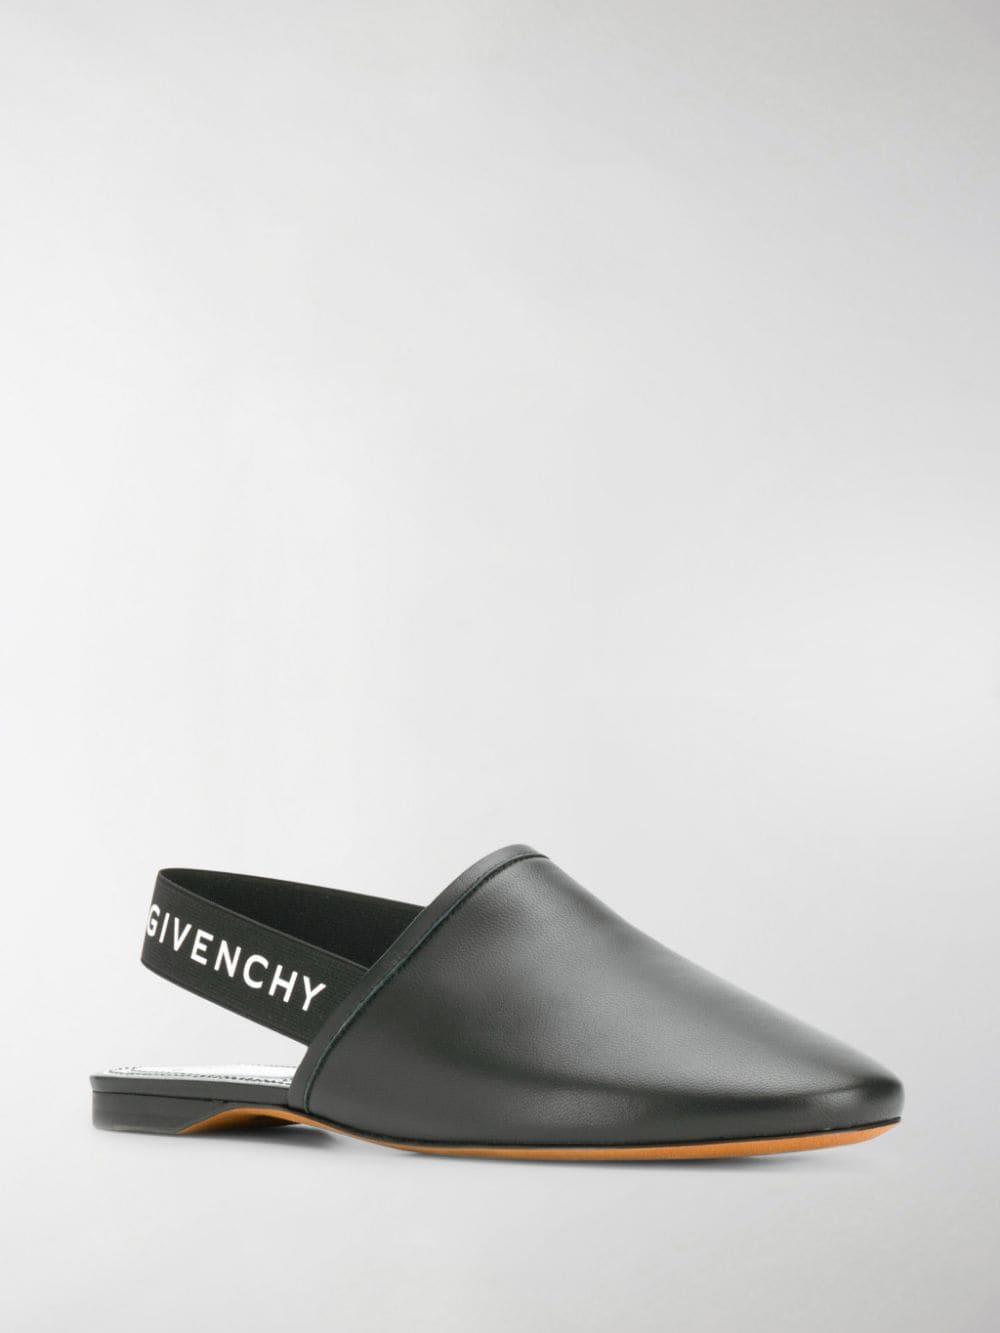 Givenchy Slingback Flat Mules in Black,Silver (Black) | Lyst